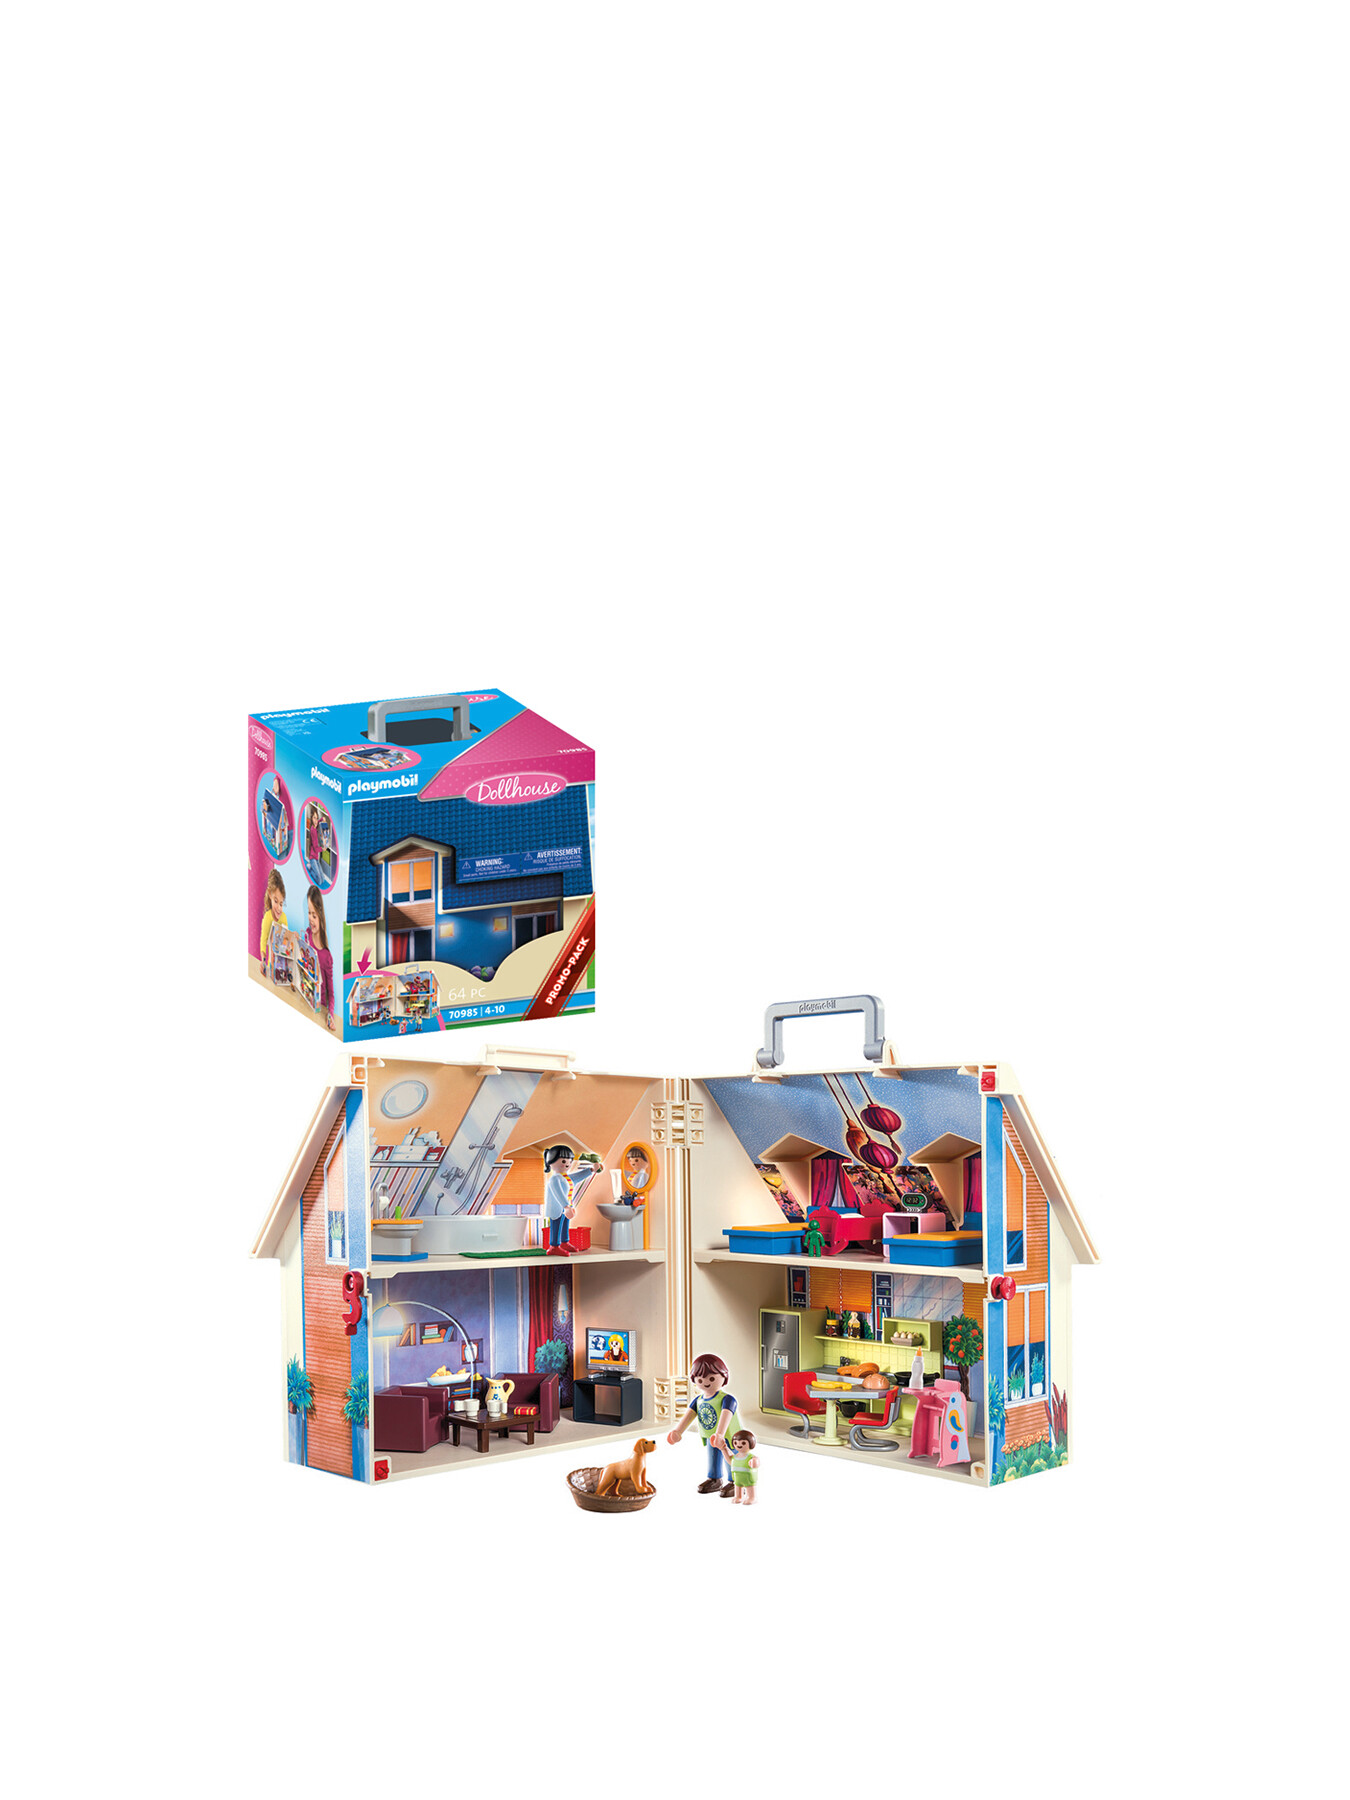 Playmobil Large Dollhouse, Recommended for ages 4 years and up